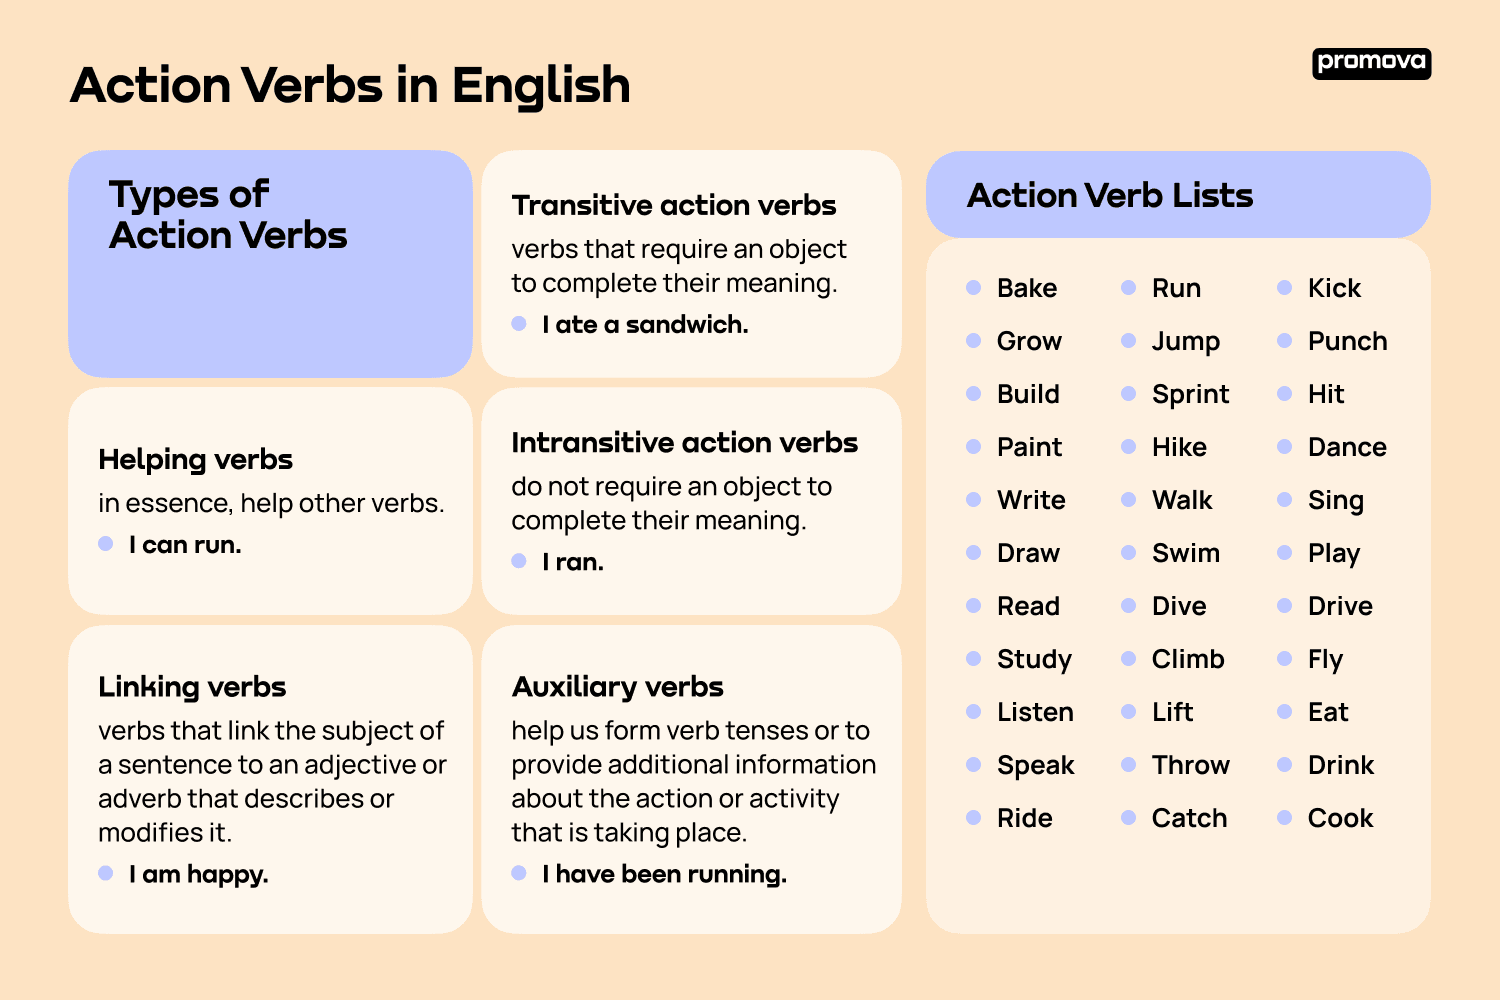 Action Verbs in English